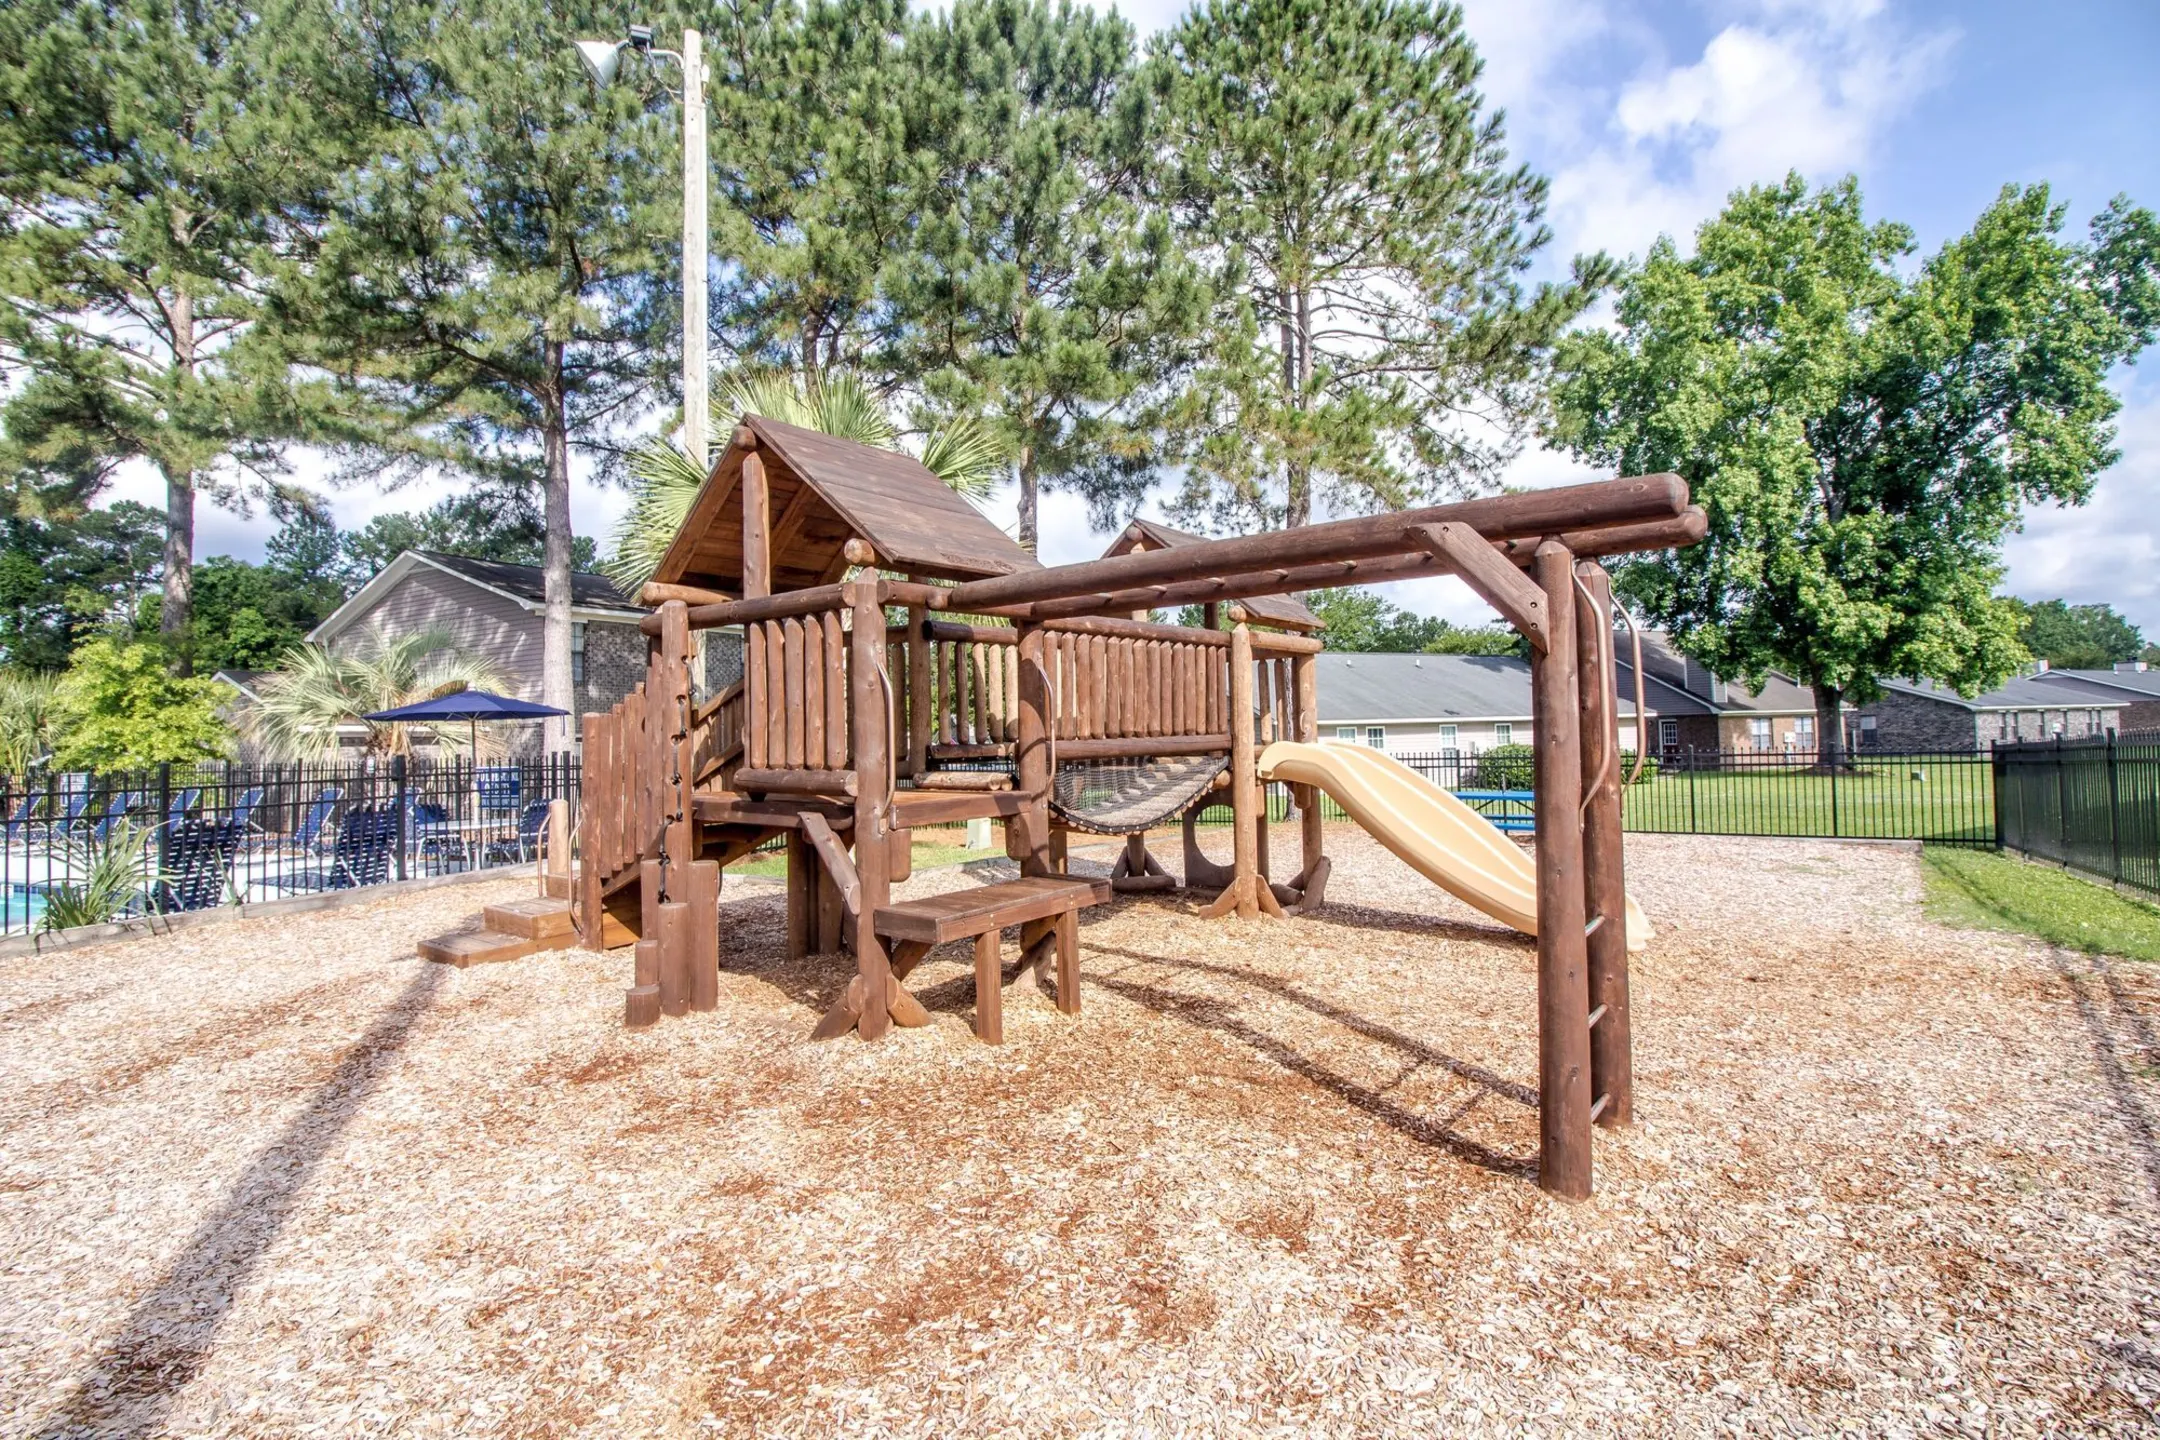 Playground - The Cottages At Crowfield - Ladson, SC